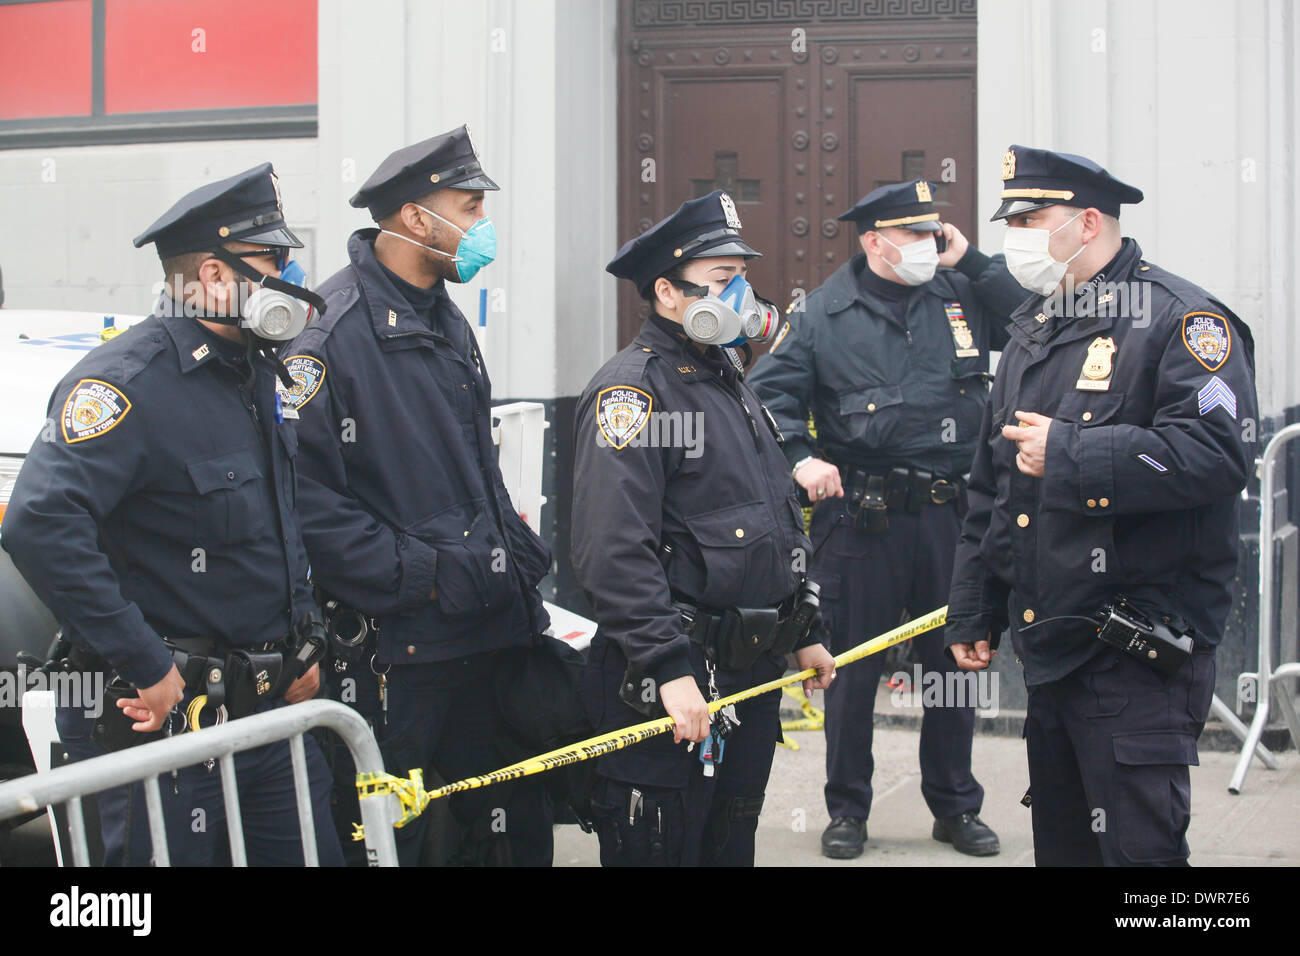 Harlem, New York City. 12 March 2014. New York City police officers wearing masks to protect against the smoky four alarm fire in Harlem. Credit:  Cal Vornberger/Alamy Live News Stock Photo